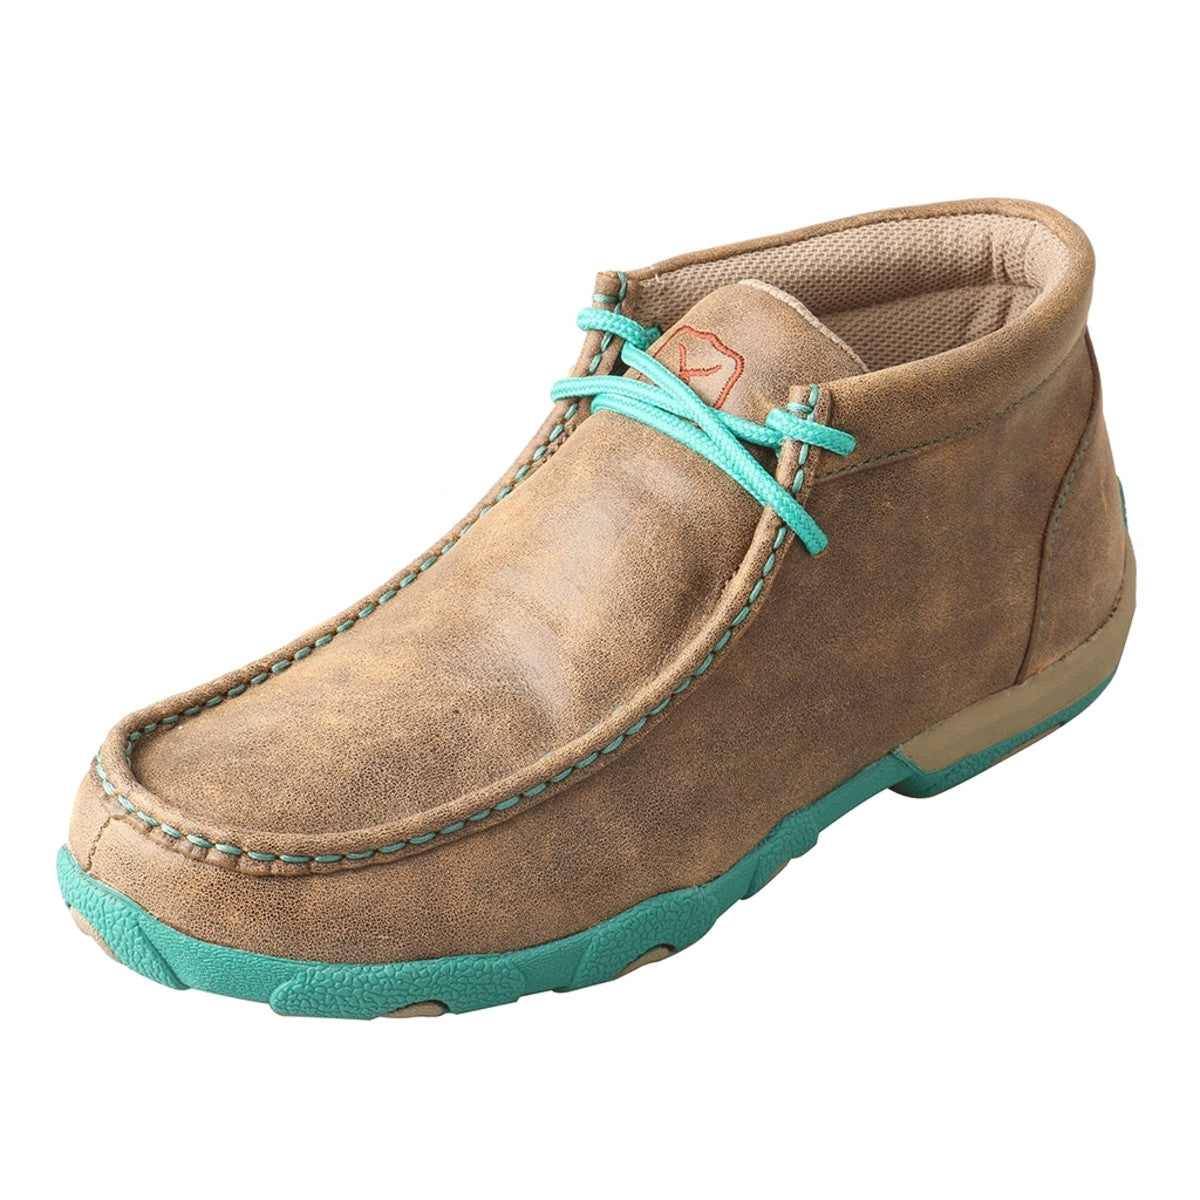 Women's Twisted X Chukka Driving Moccasins Shoe in Bomber & Turquoise from the front